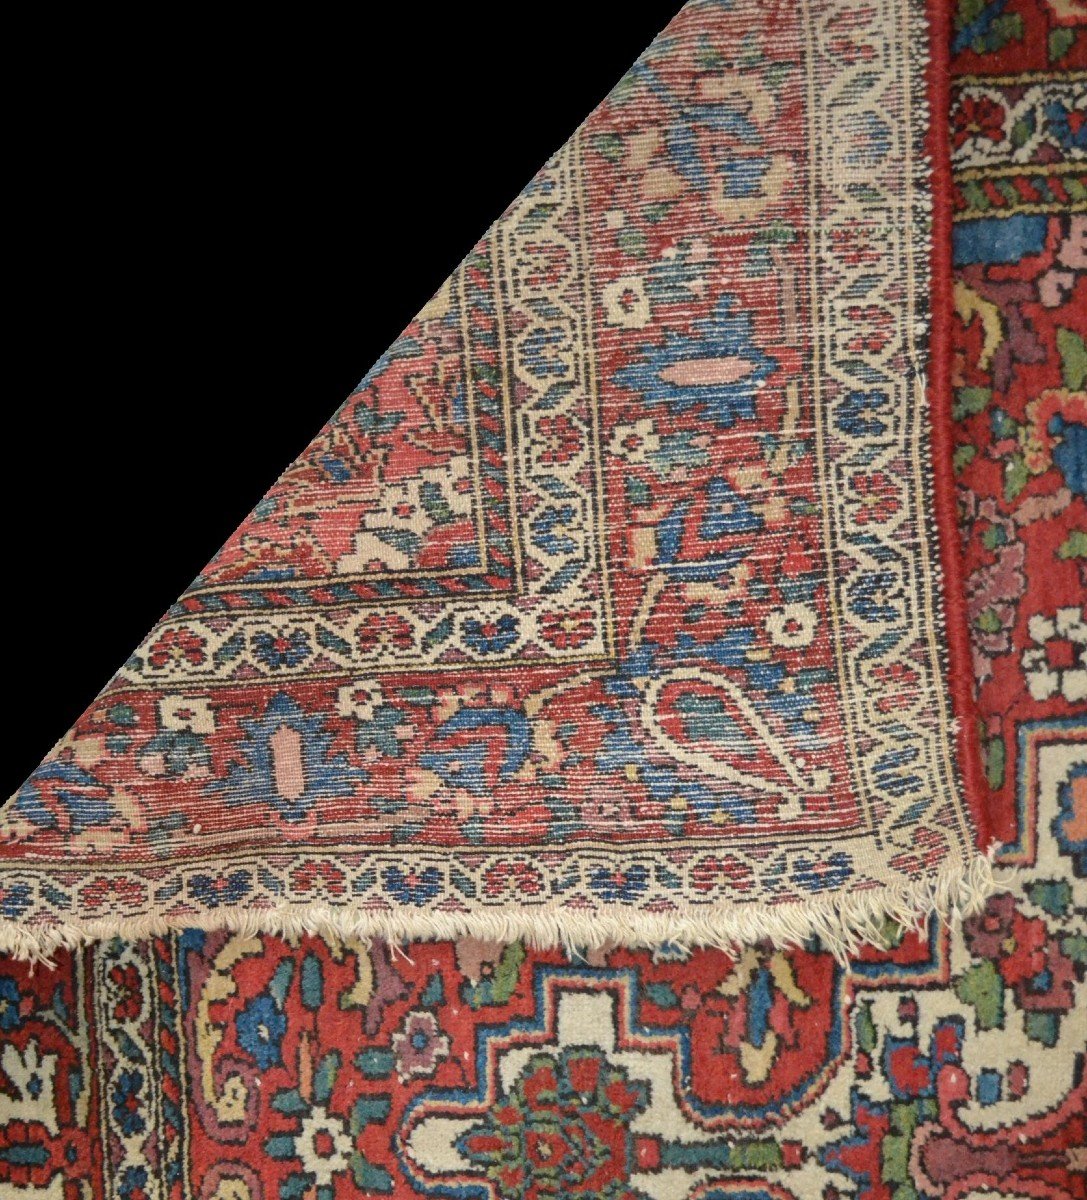 Antique Bakhtiar Rug, 133 X 207 Cm, Hand-knotted Wool In Iran, First Part Of The 20th Century-photo-6